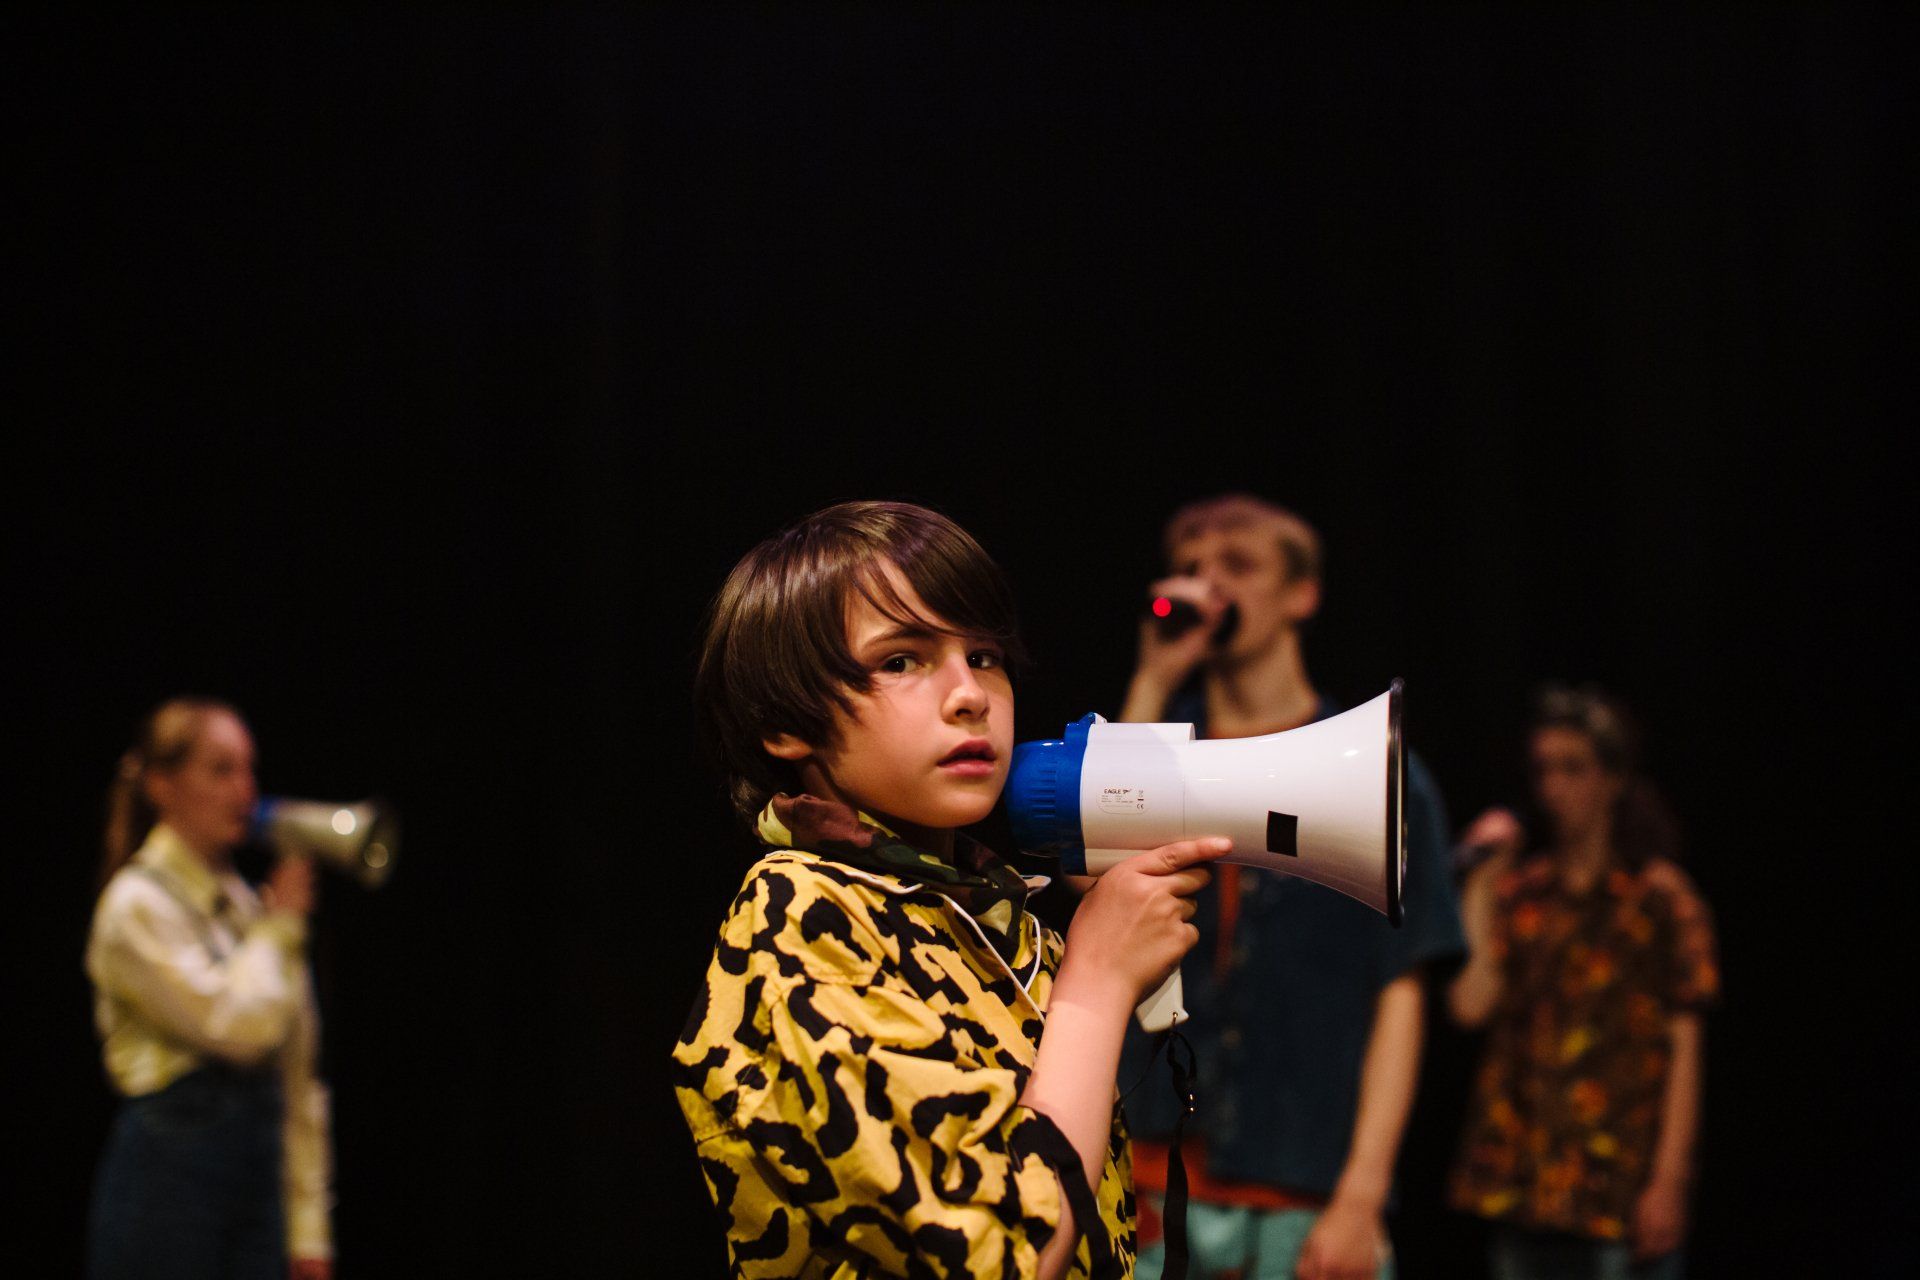 a young boy is holding a megaphone in a dark room .